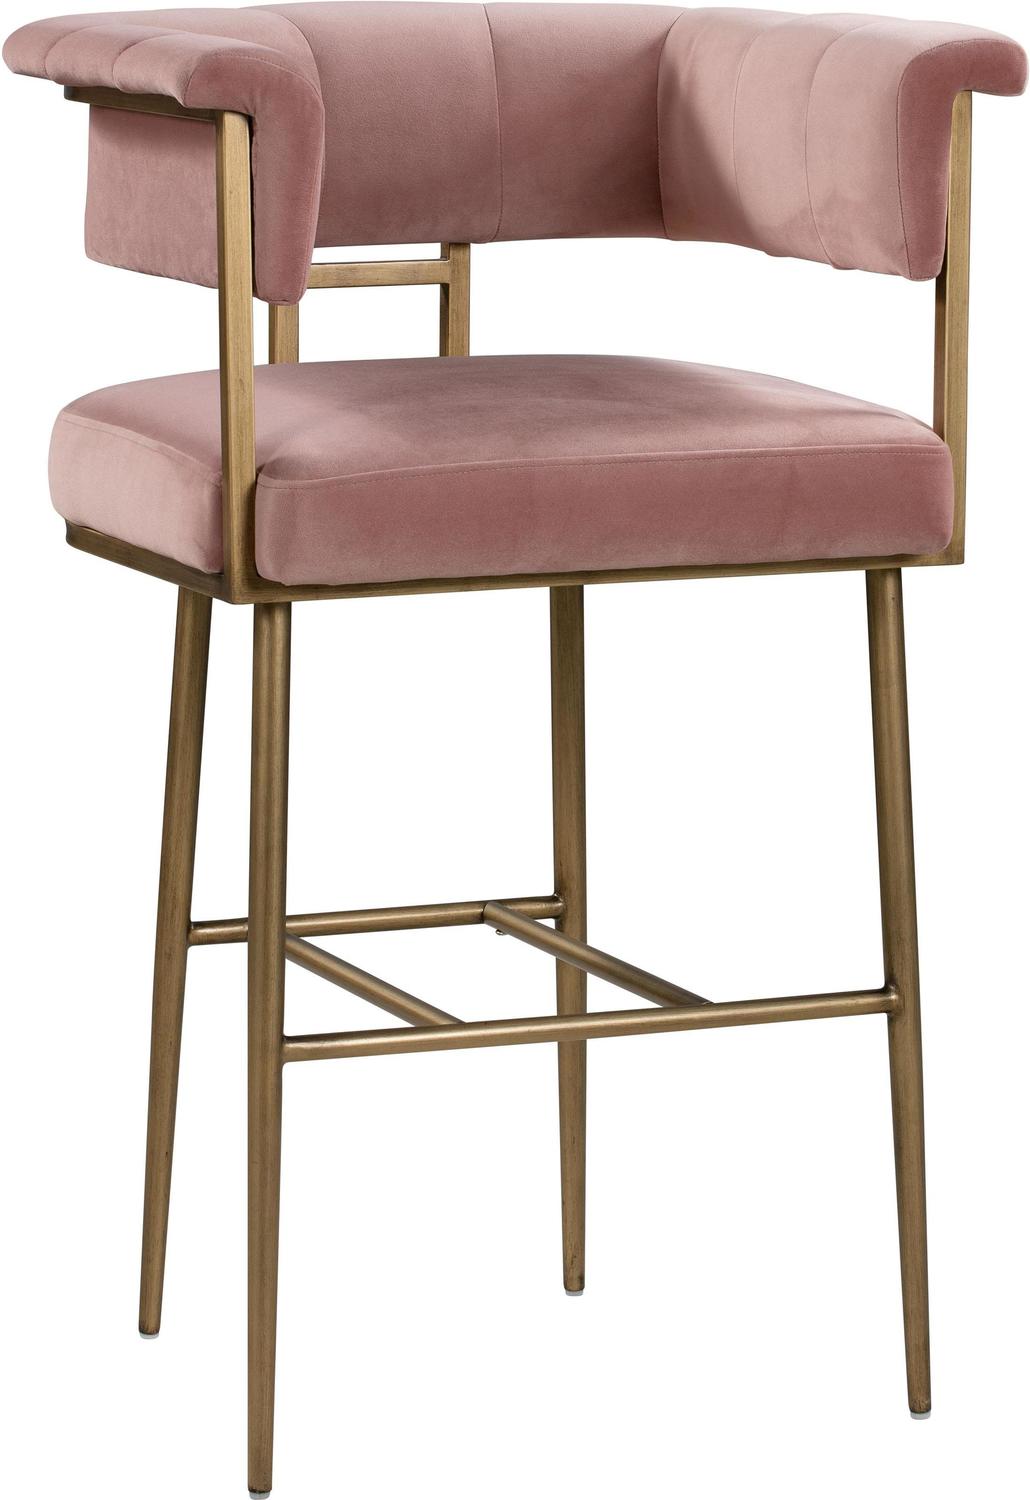 white and gold bar stools set of 4 Contemporary Design Furniture Stools Blush